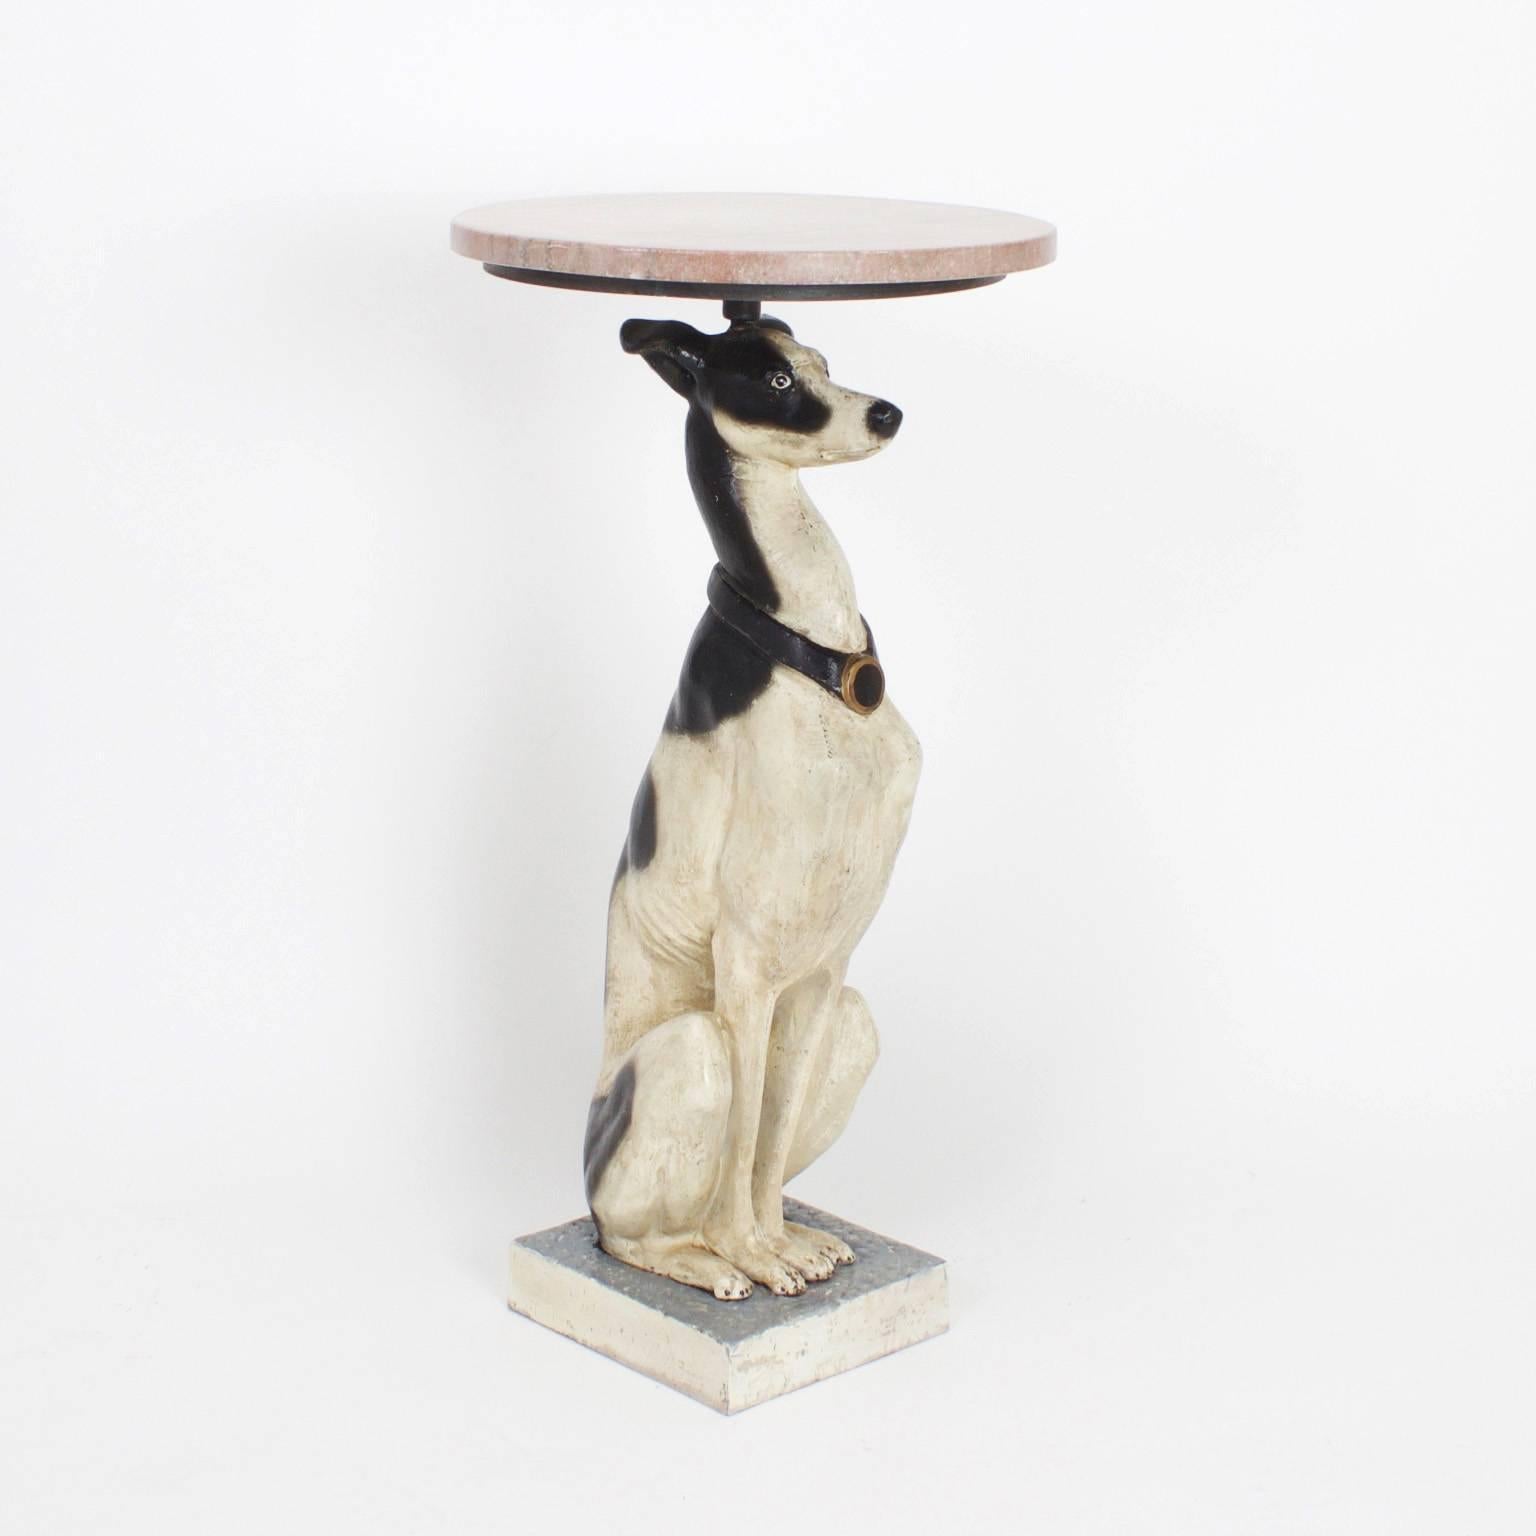 Pair of iron whippets or greyhound tables with realistic physiques decorated with rustic white and black paint. These dogs, now in service as stands, are sporting swank collars and quirky expressions. The tops are rouge marble.

.
  